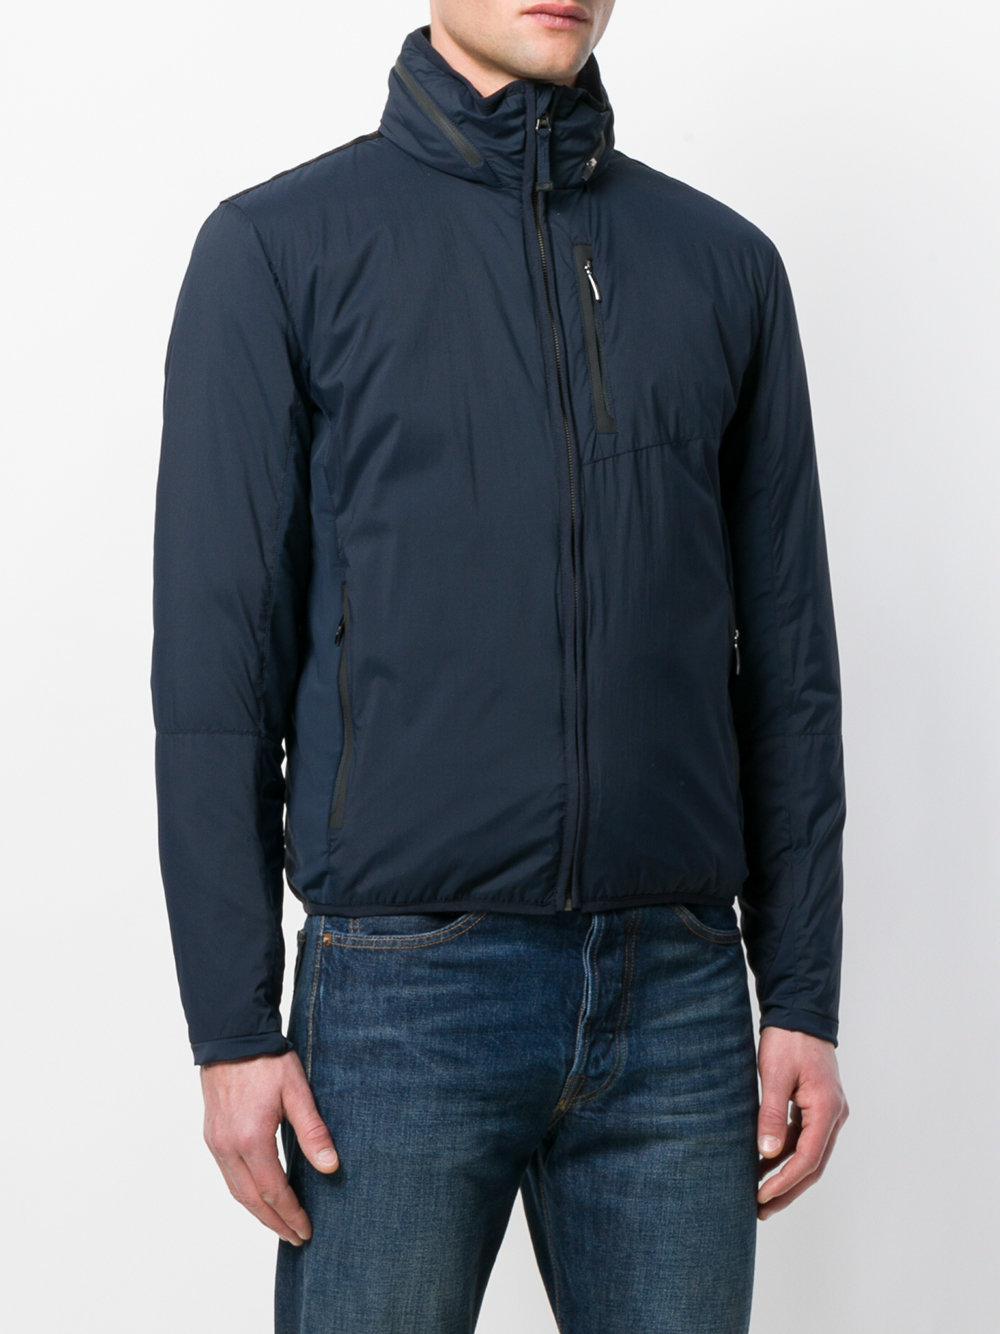 Parajumpers Synthetic Duluth Jacket in Blue for Men - Lyst